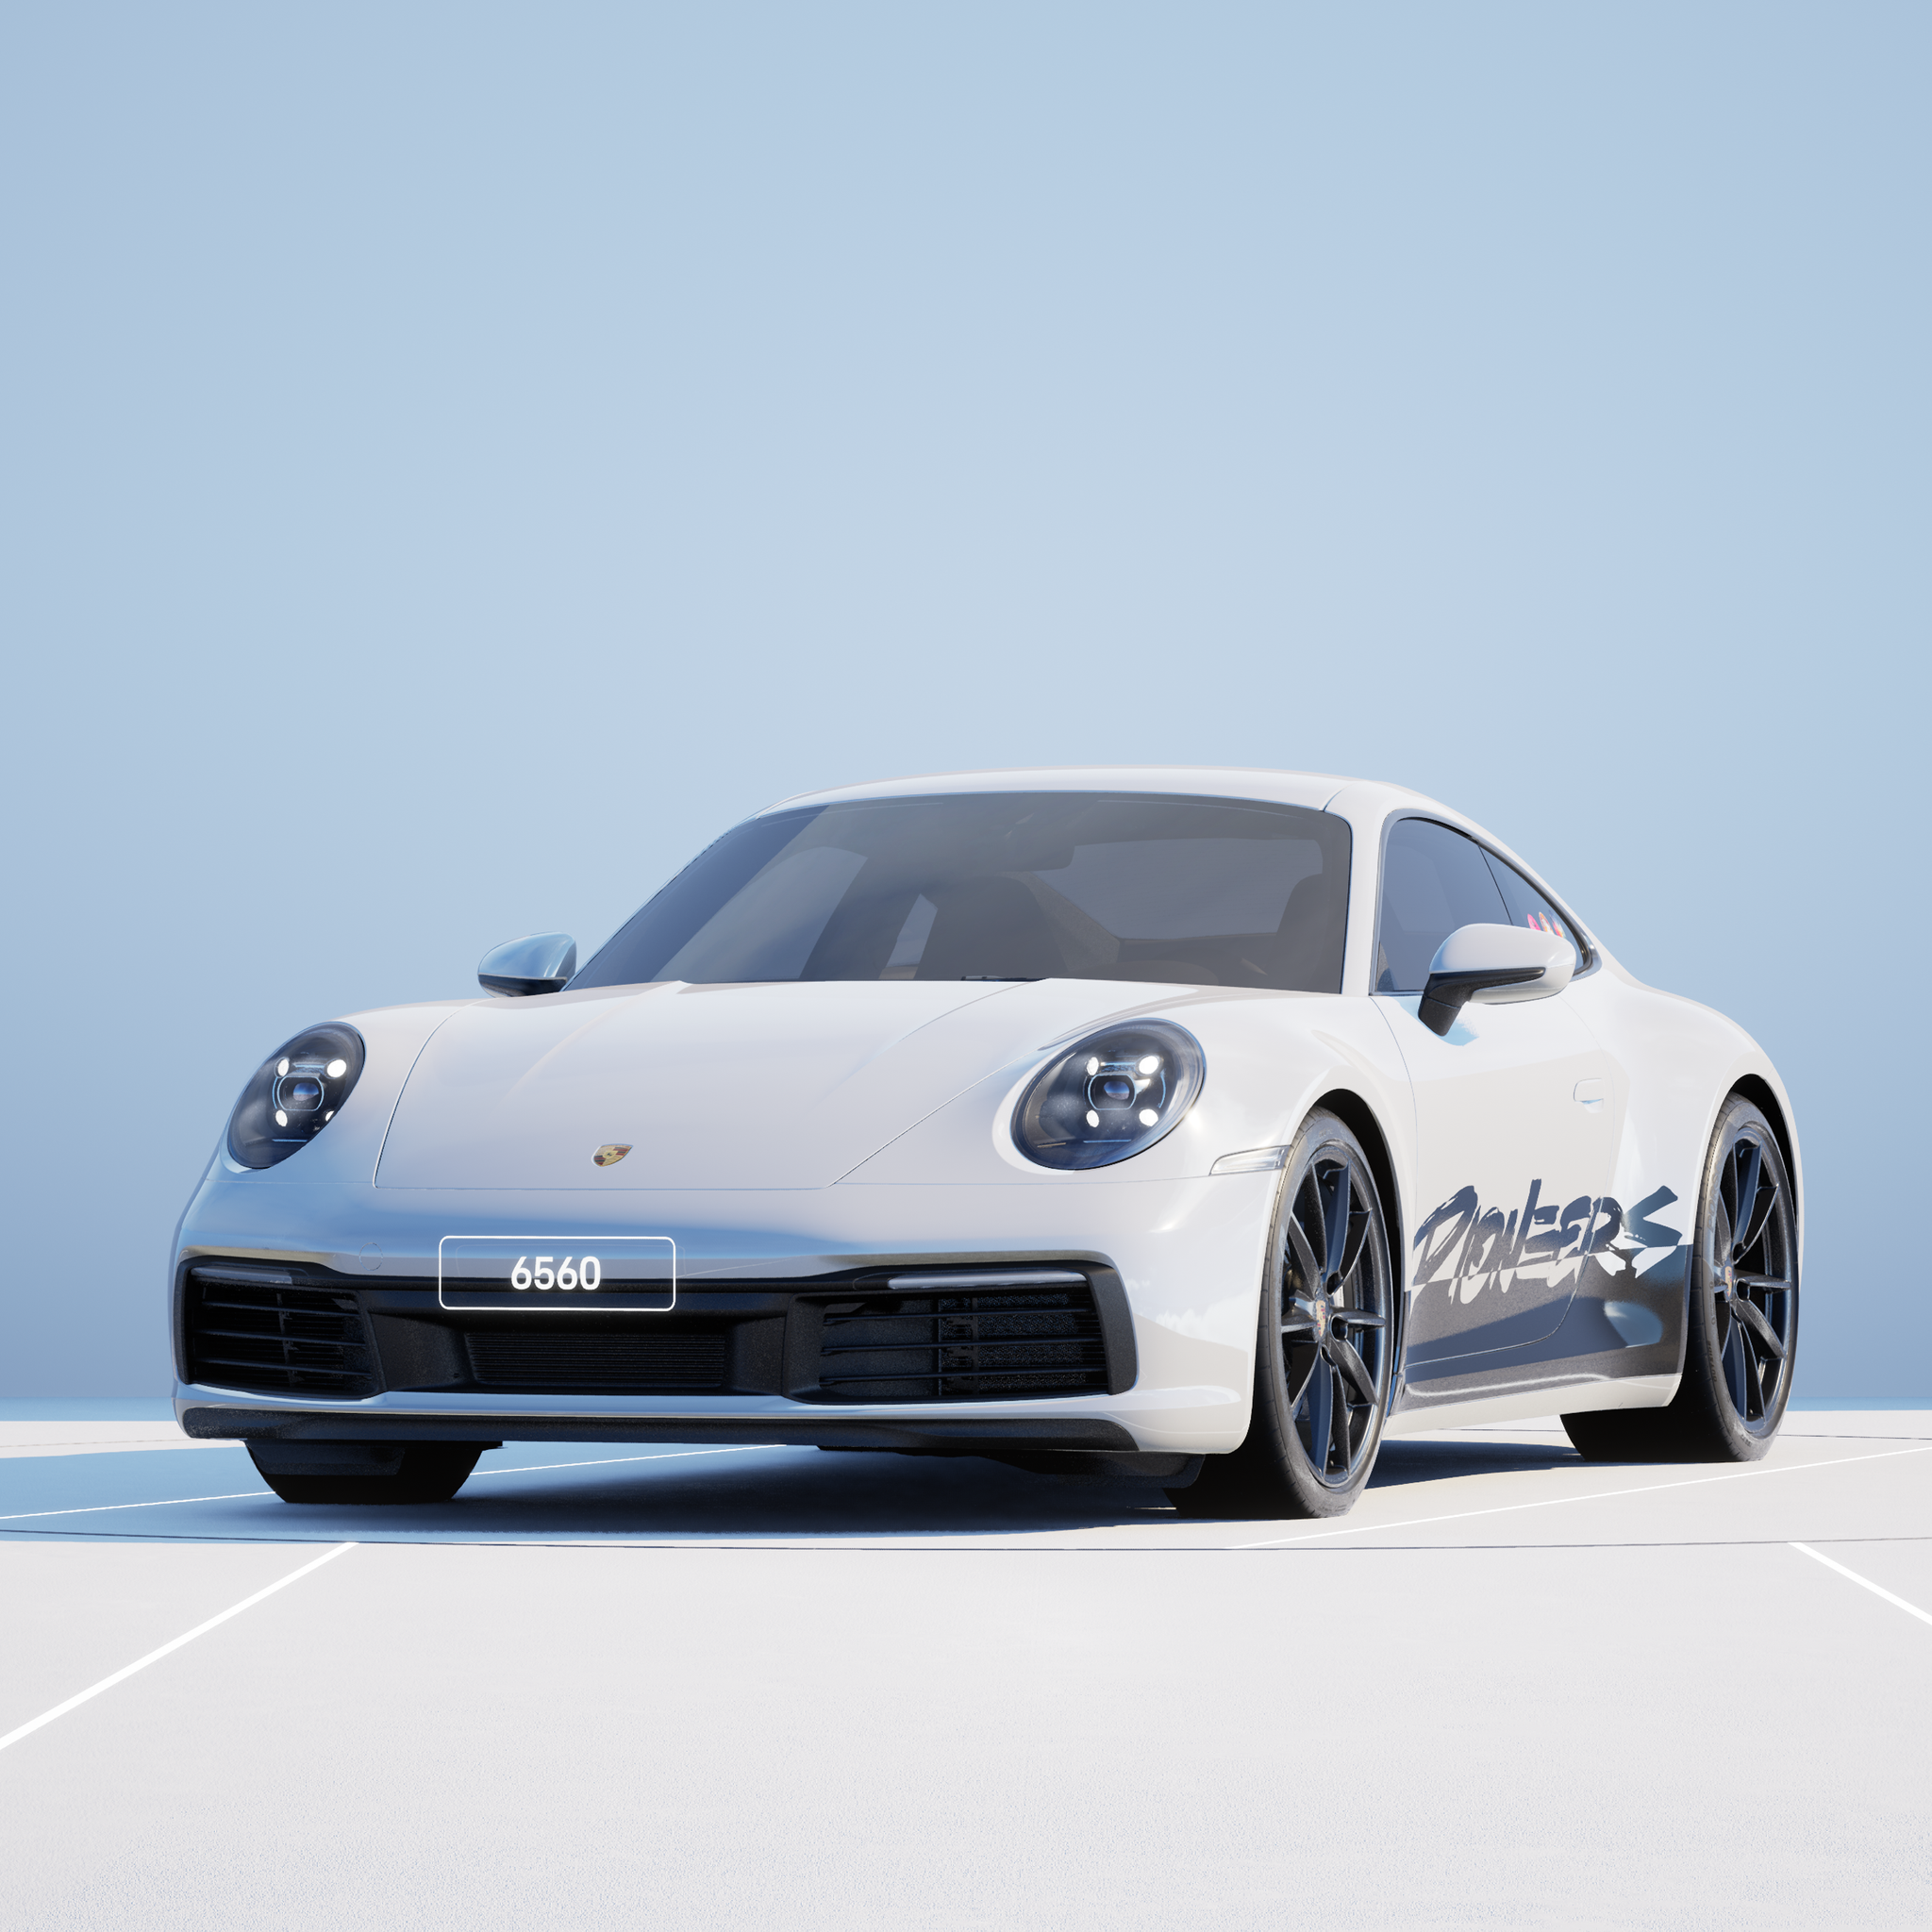 The PORSCHΞ 911 6560 image in phase